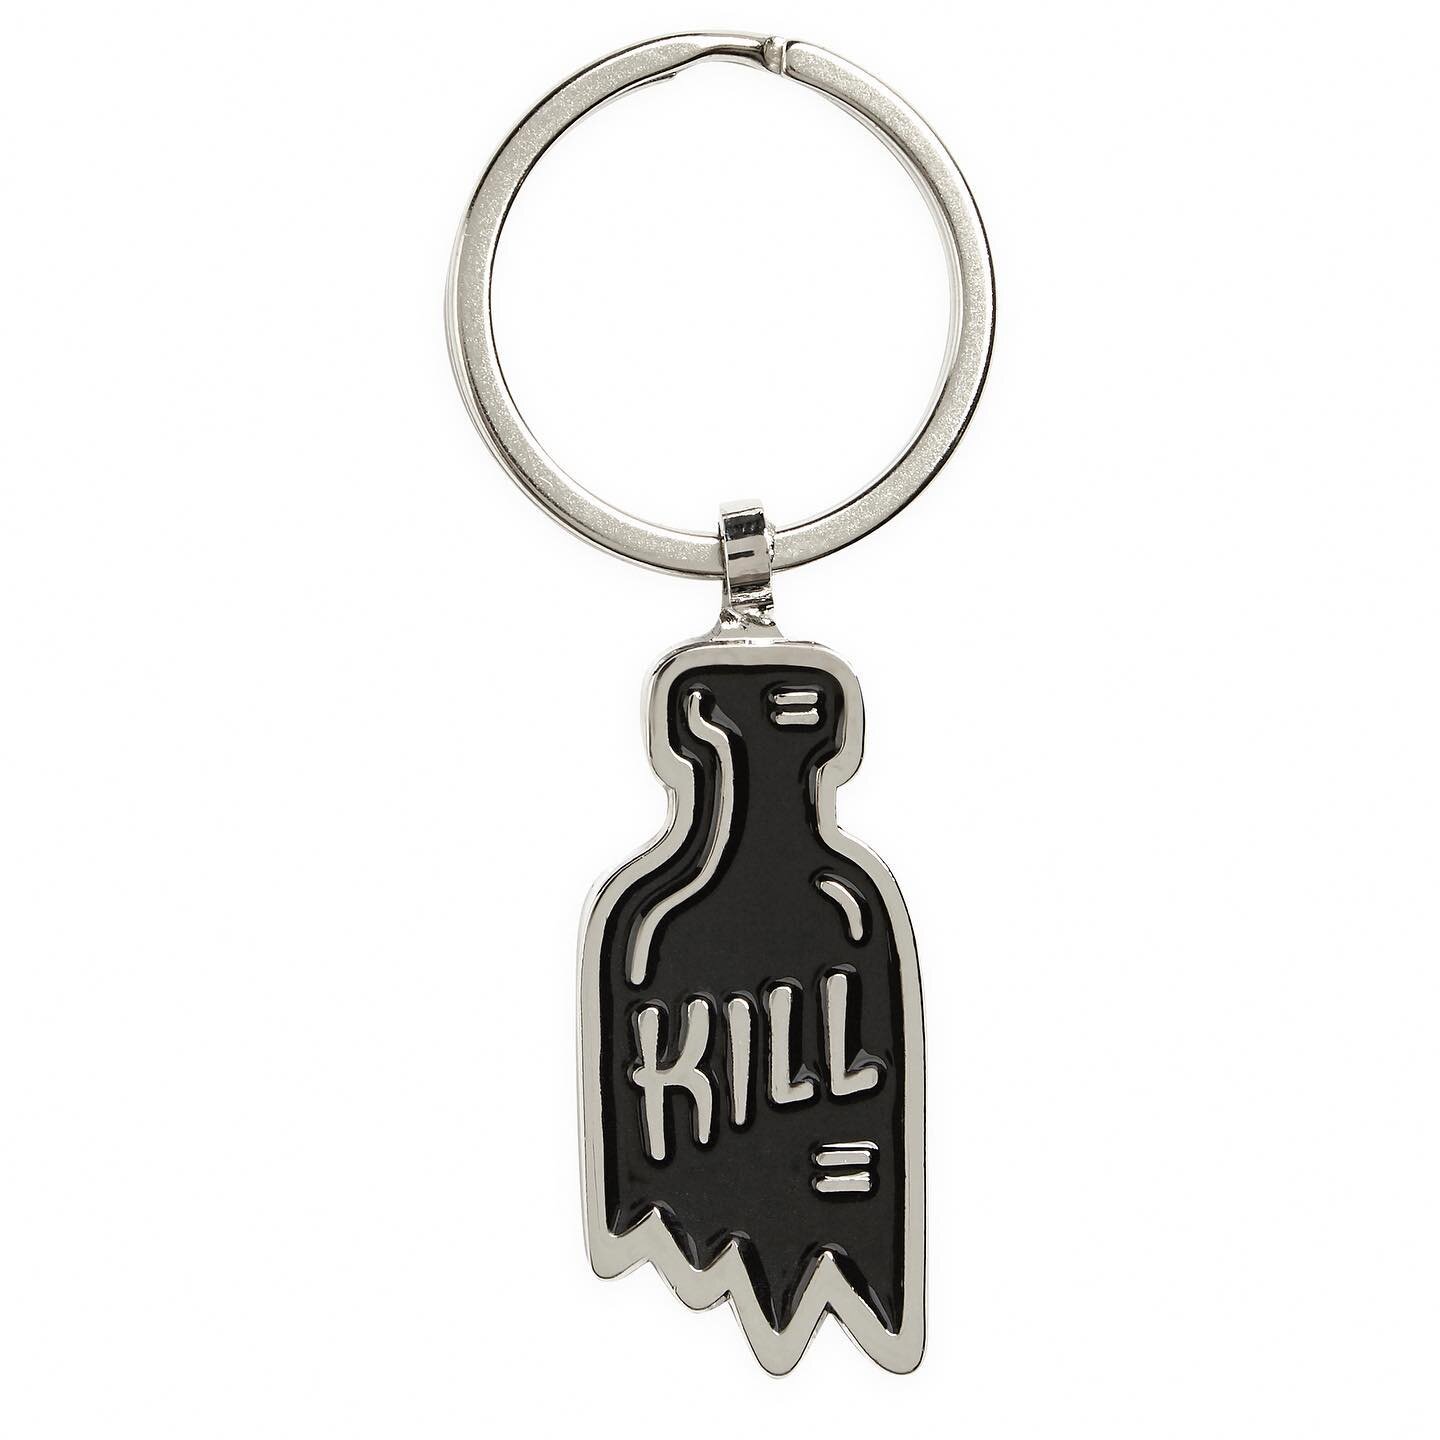 New KILL keyring, one of a sick new lineup in the store. Get one, bang it on your keys and put a stop to boring keys. Comes with one of those fingernail-breaking spiral doo-dats to keep your shit together.
www.deathpatches.com.au
#deathpatches #kill 